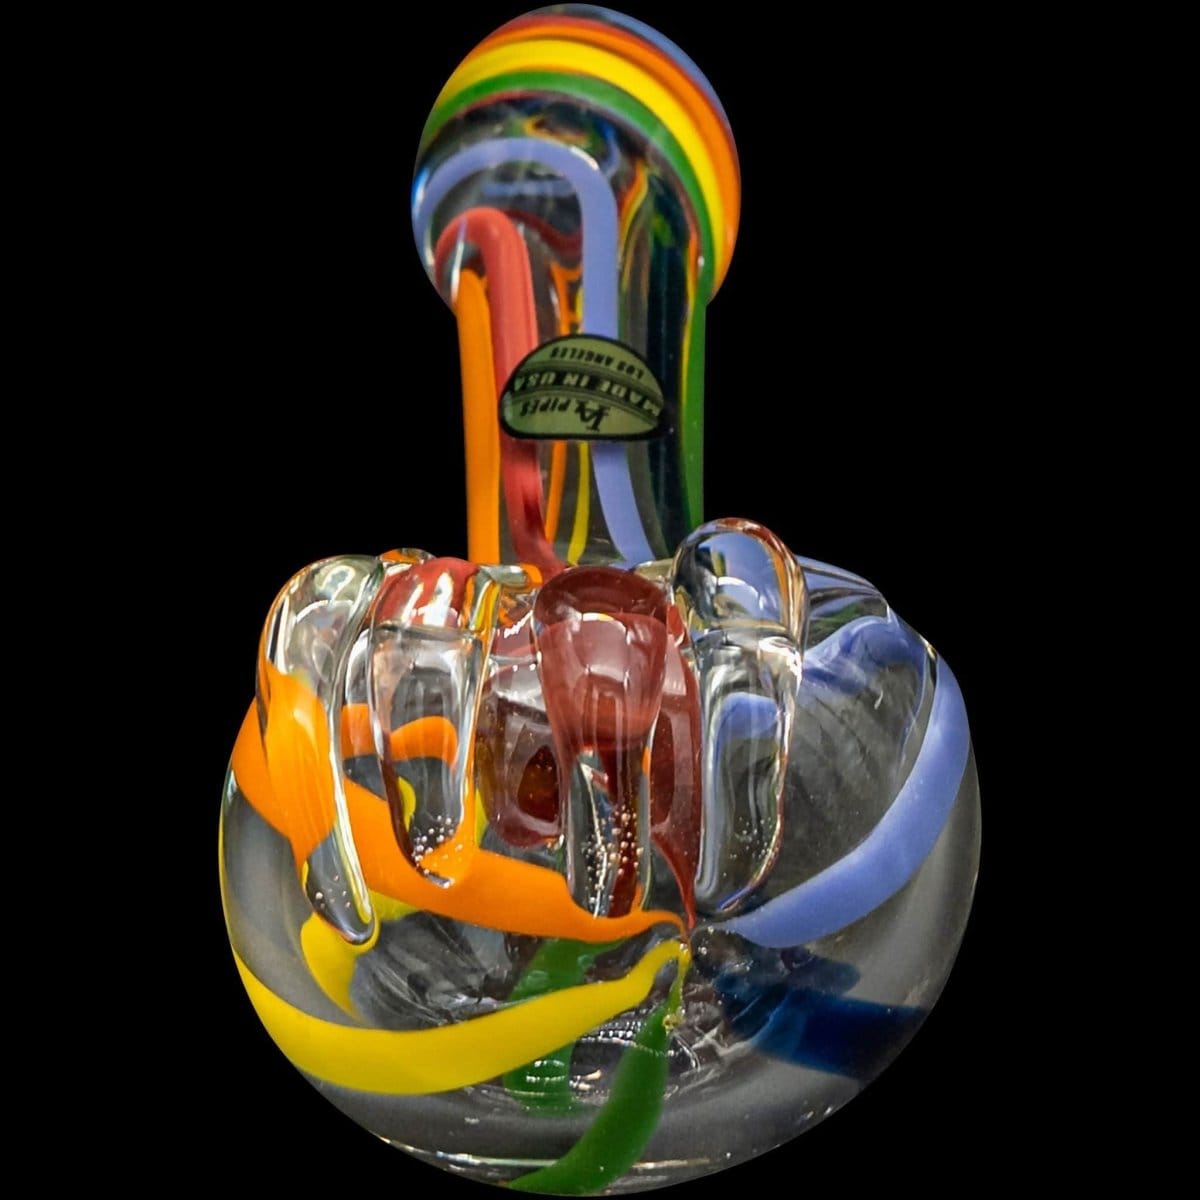 LA Pipes Hand Pipe "Rainbow Ripper" Spoon Hand-Pipe